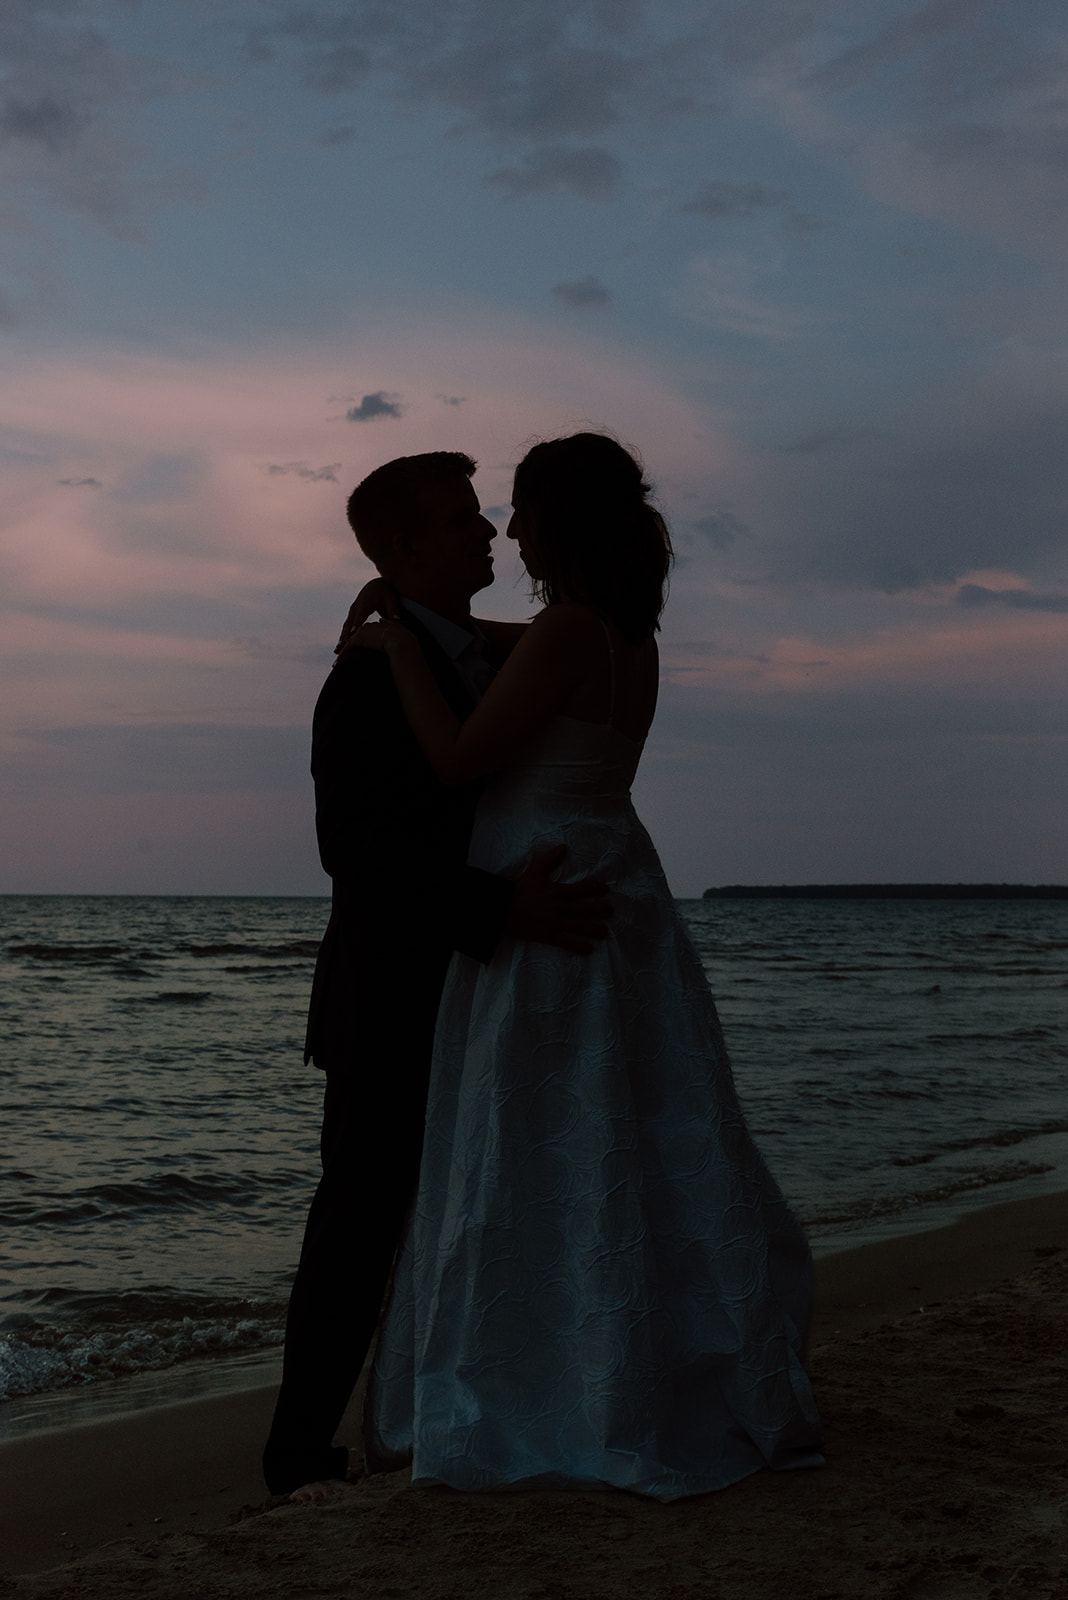 Husband and wife silhouette at sunset on Lake Michigan in Jacksonport, Wisconsin